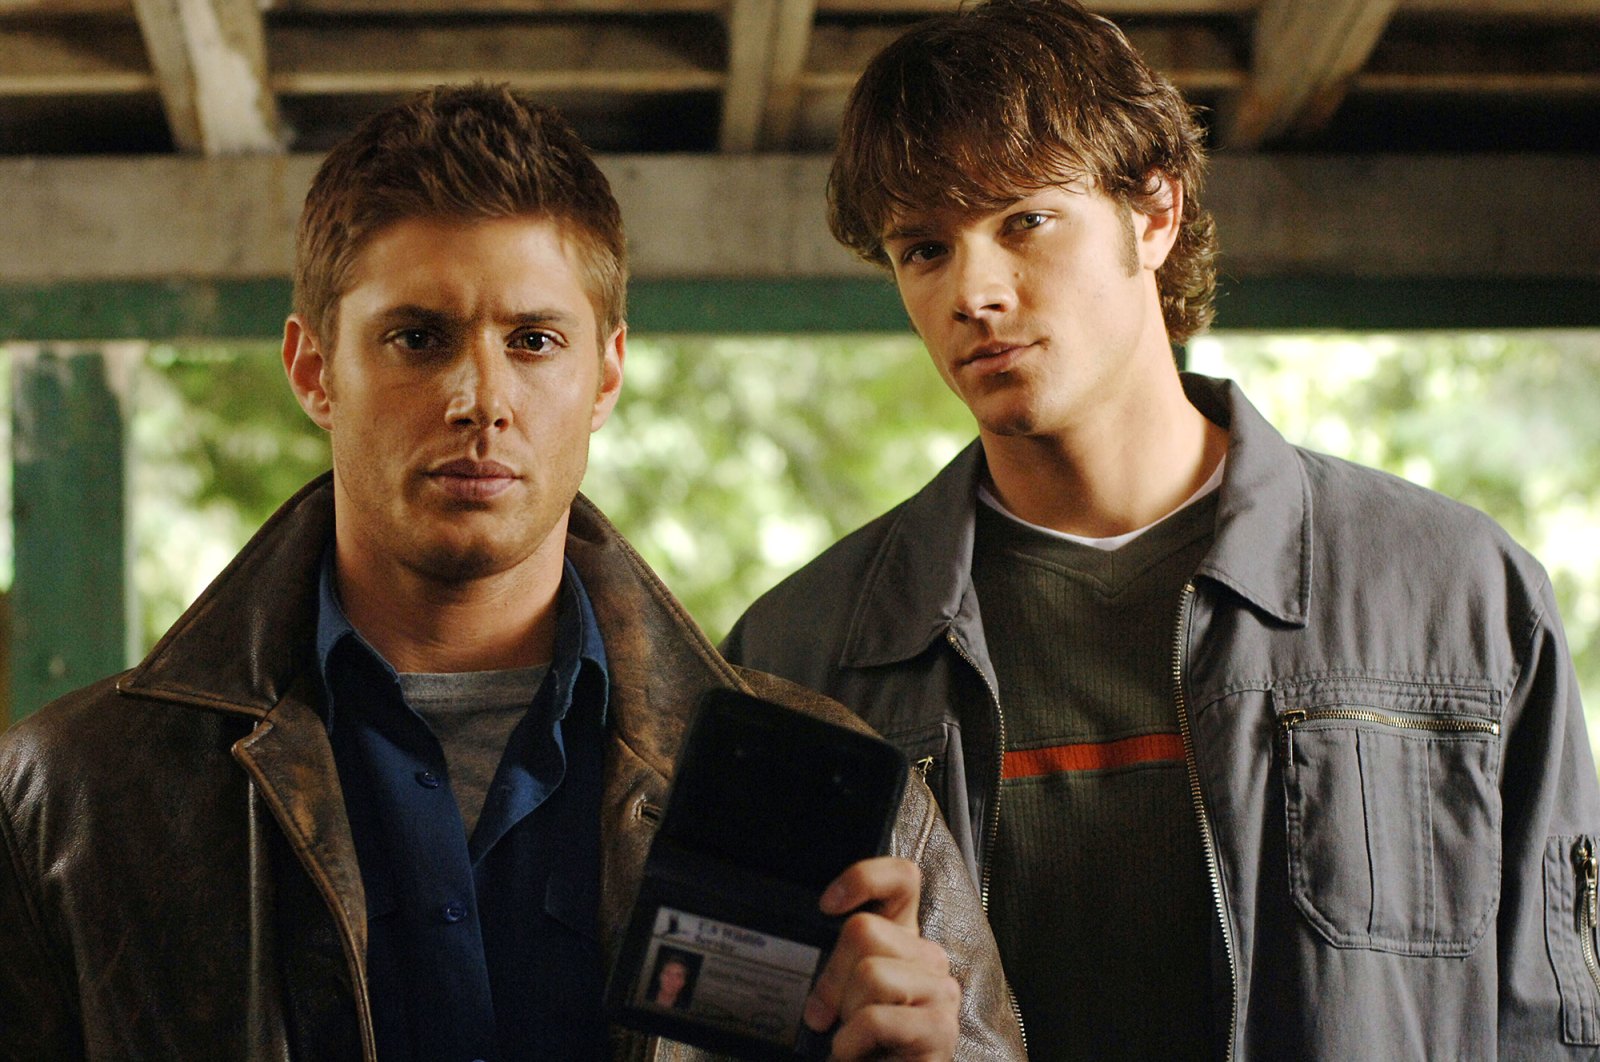 I miss Sam and Dean Winchester